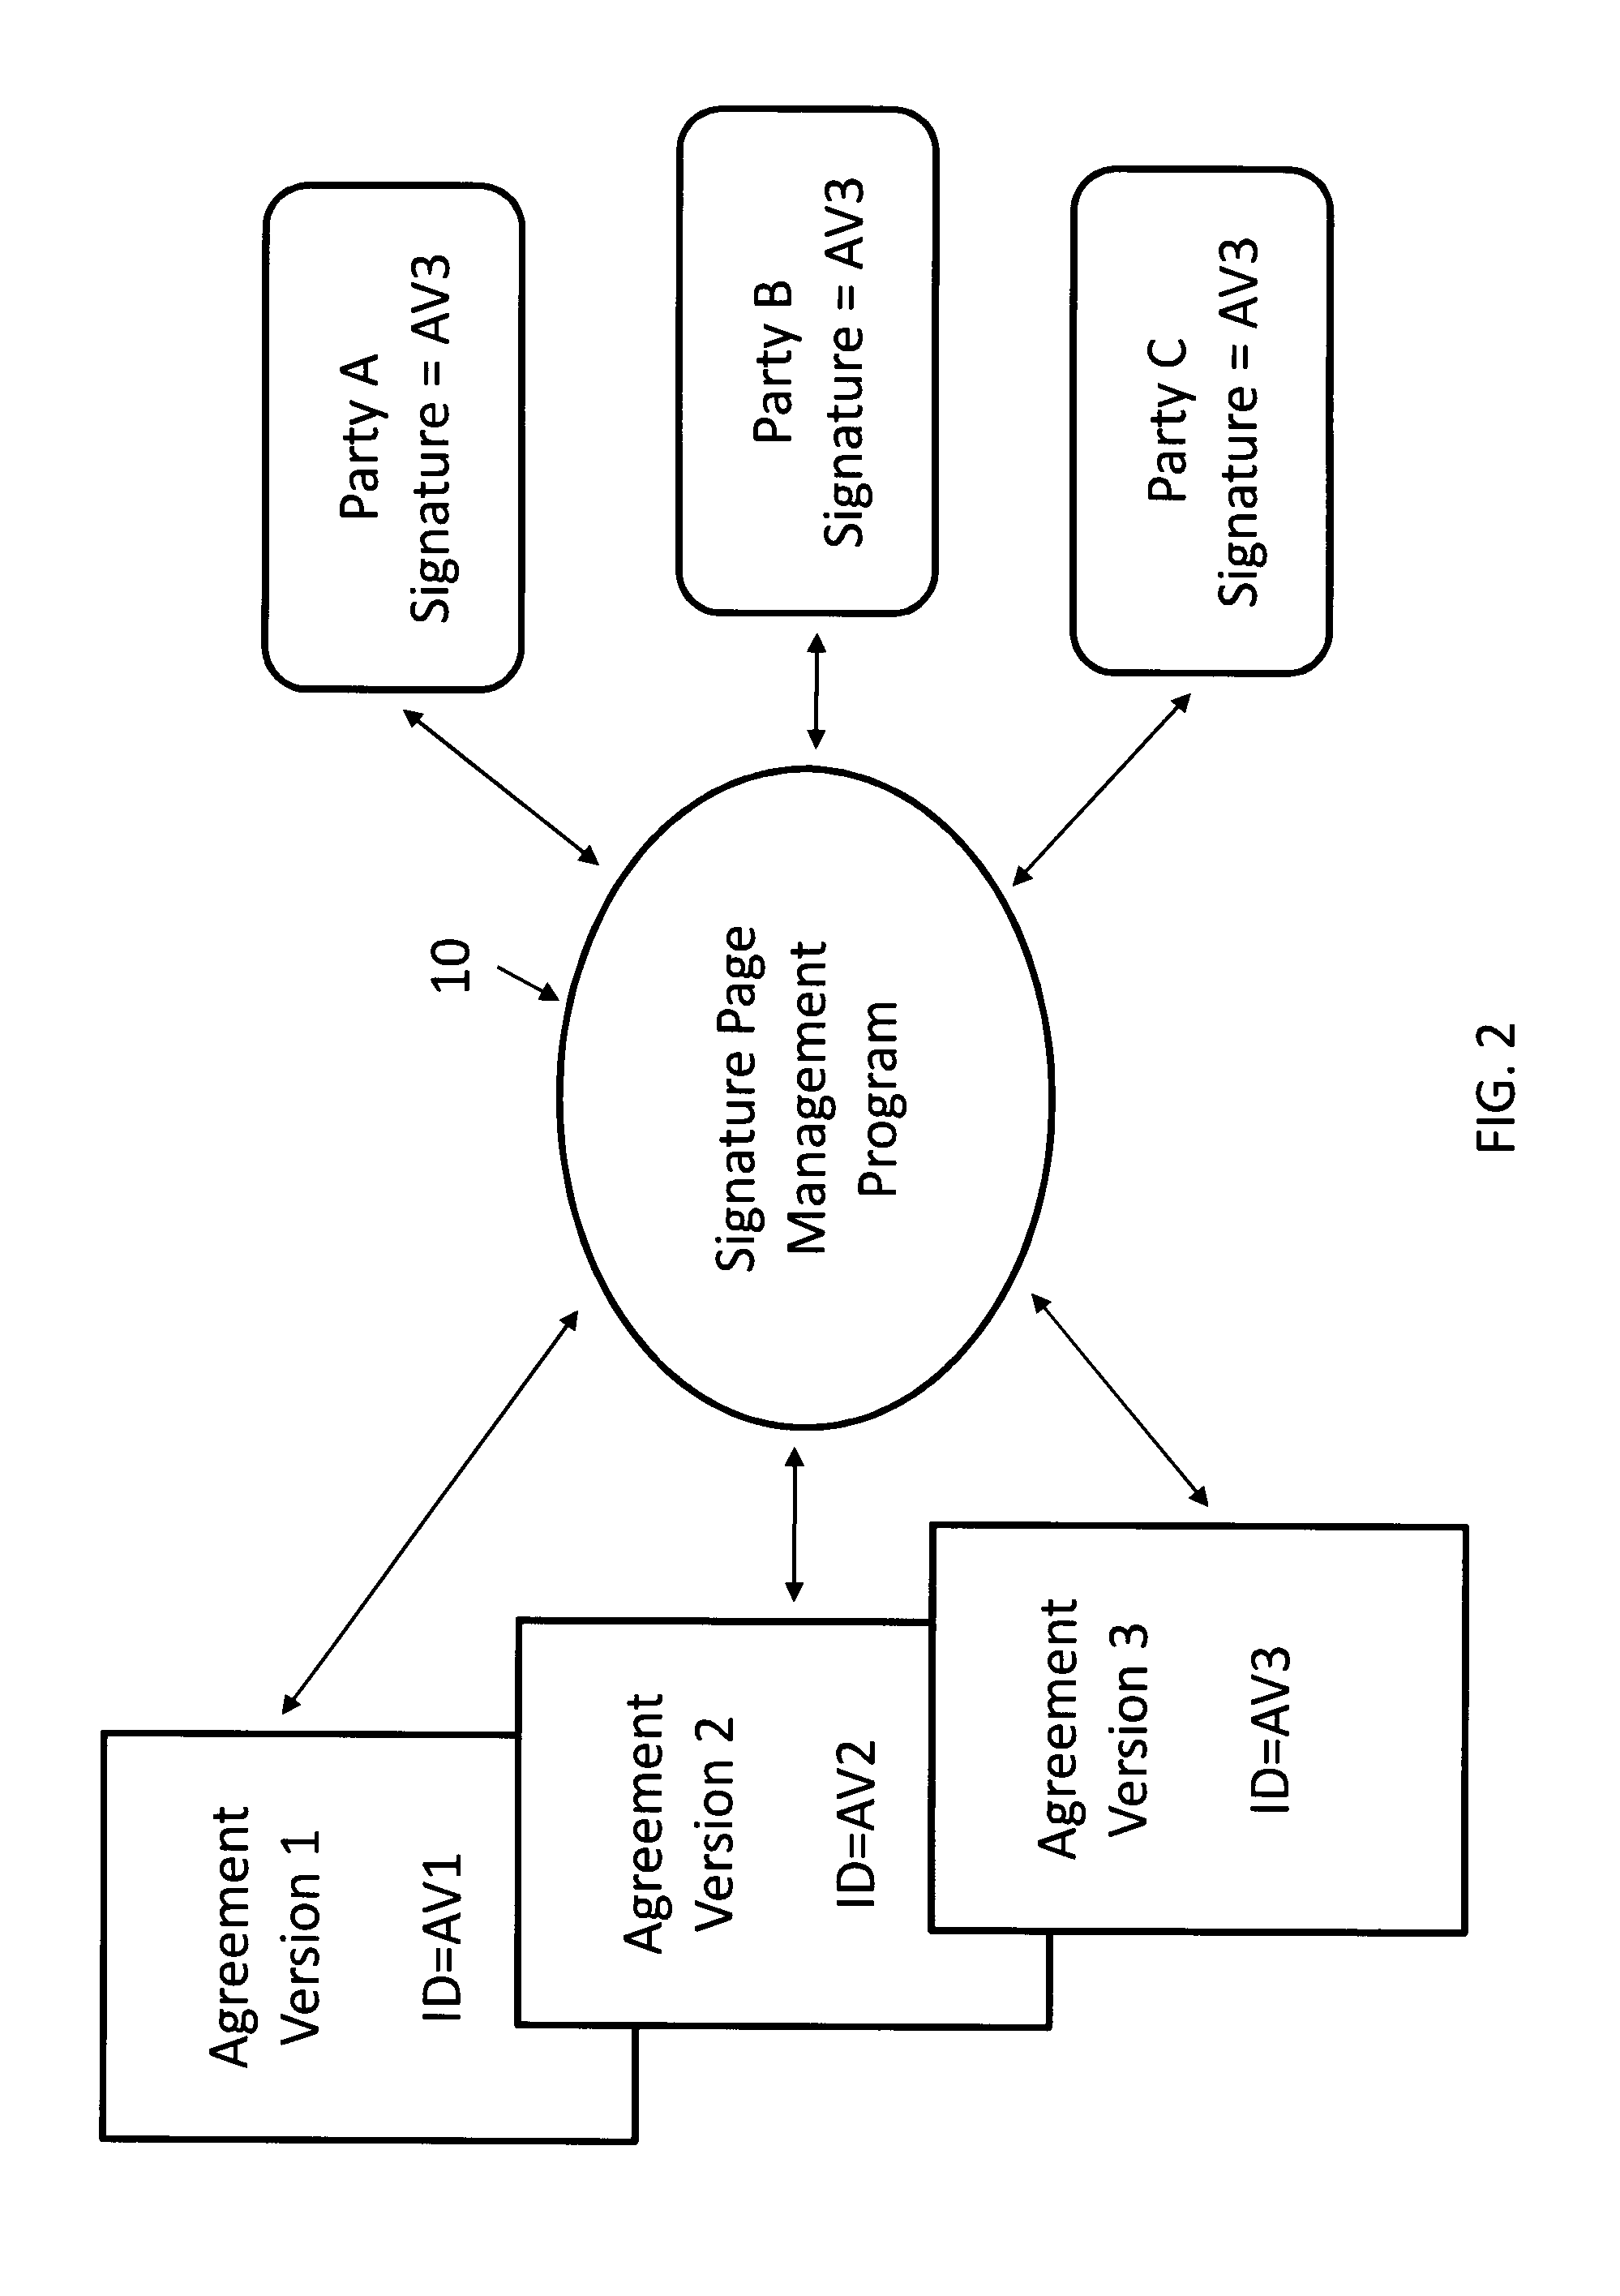 Method of creating and managing signature pages